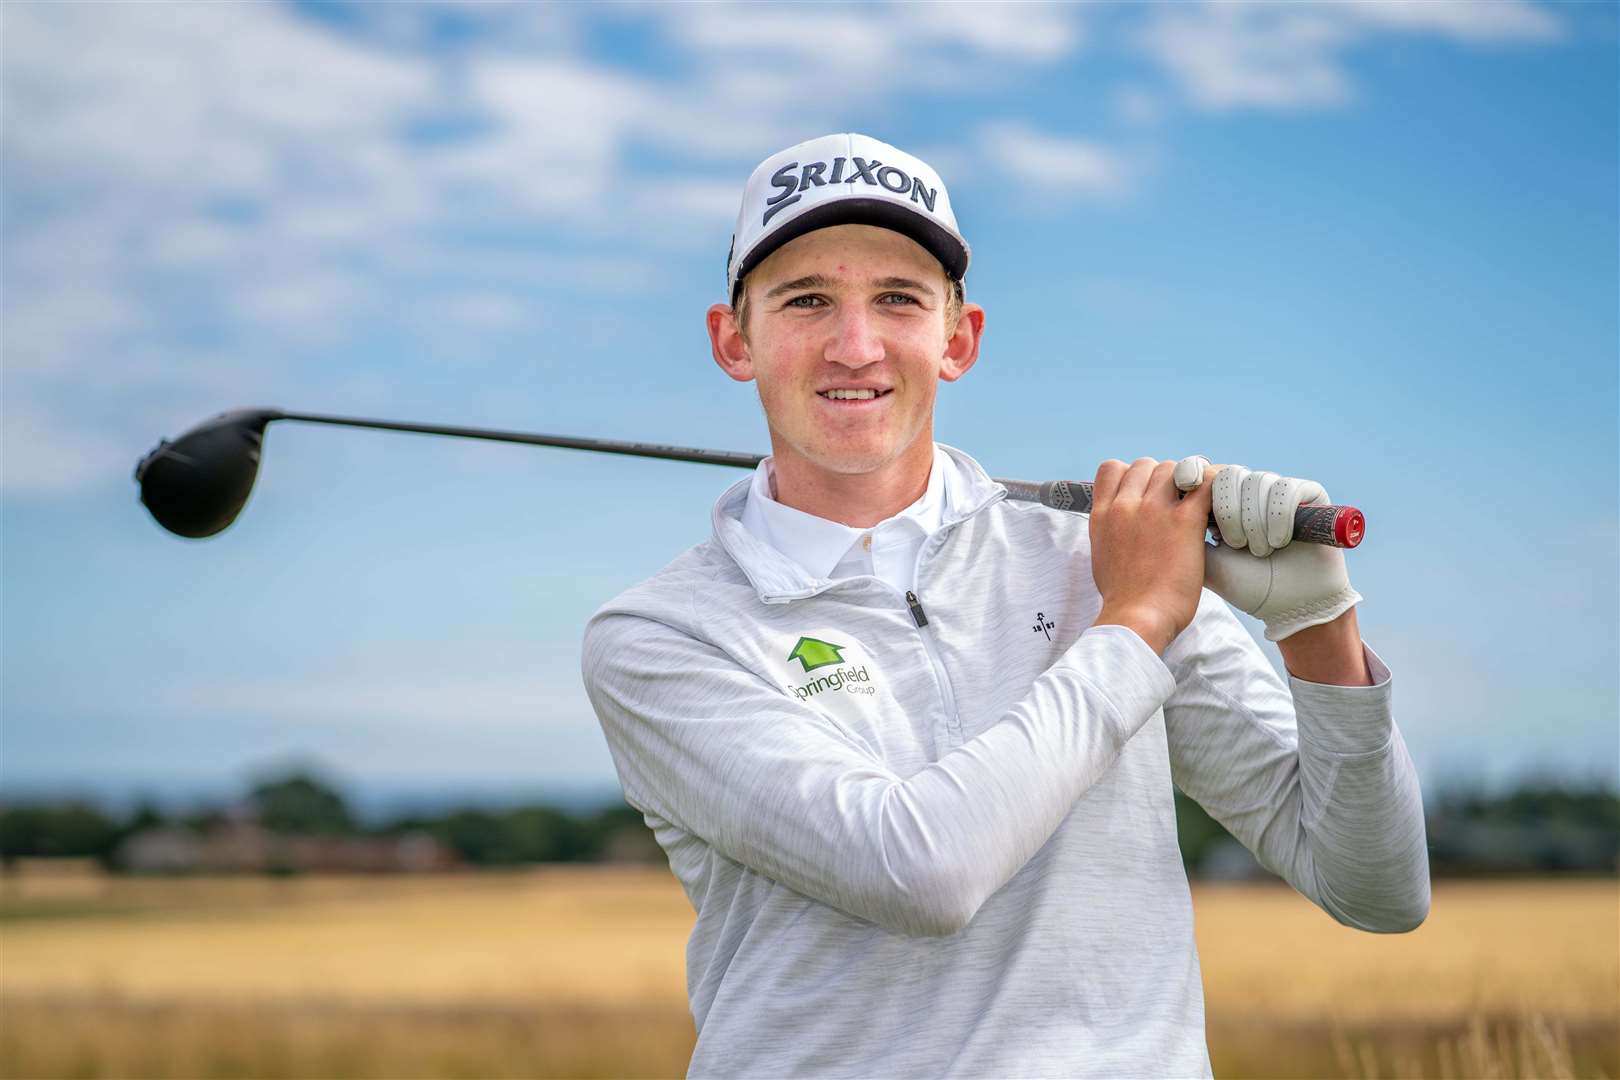 Calum Scott will compete in the 2023 Walker Cup after his place in the Great Britain and Ireland squad was confirmed.